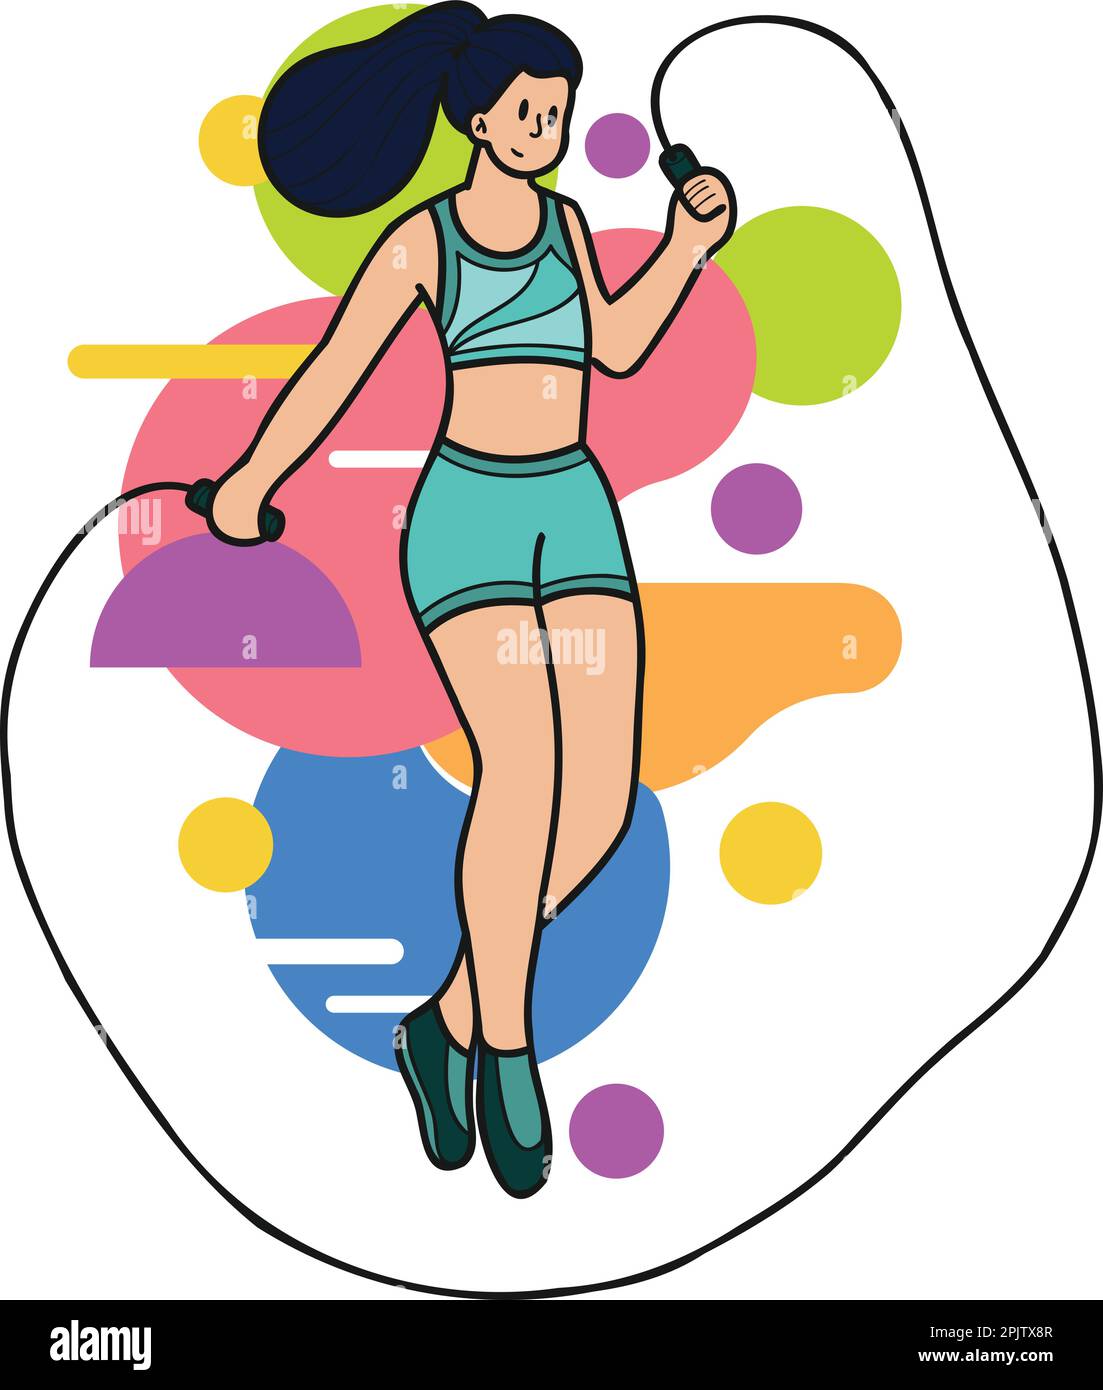 Healthy fitness girl jumping rope illustration in doodle style isolated on background Stock Vector